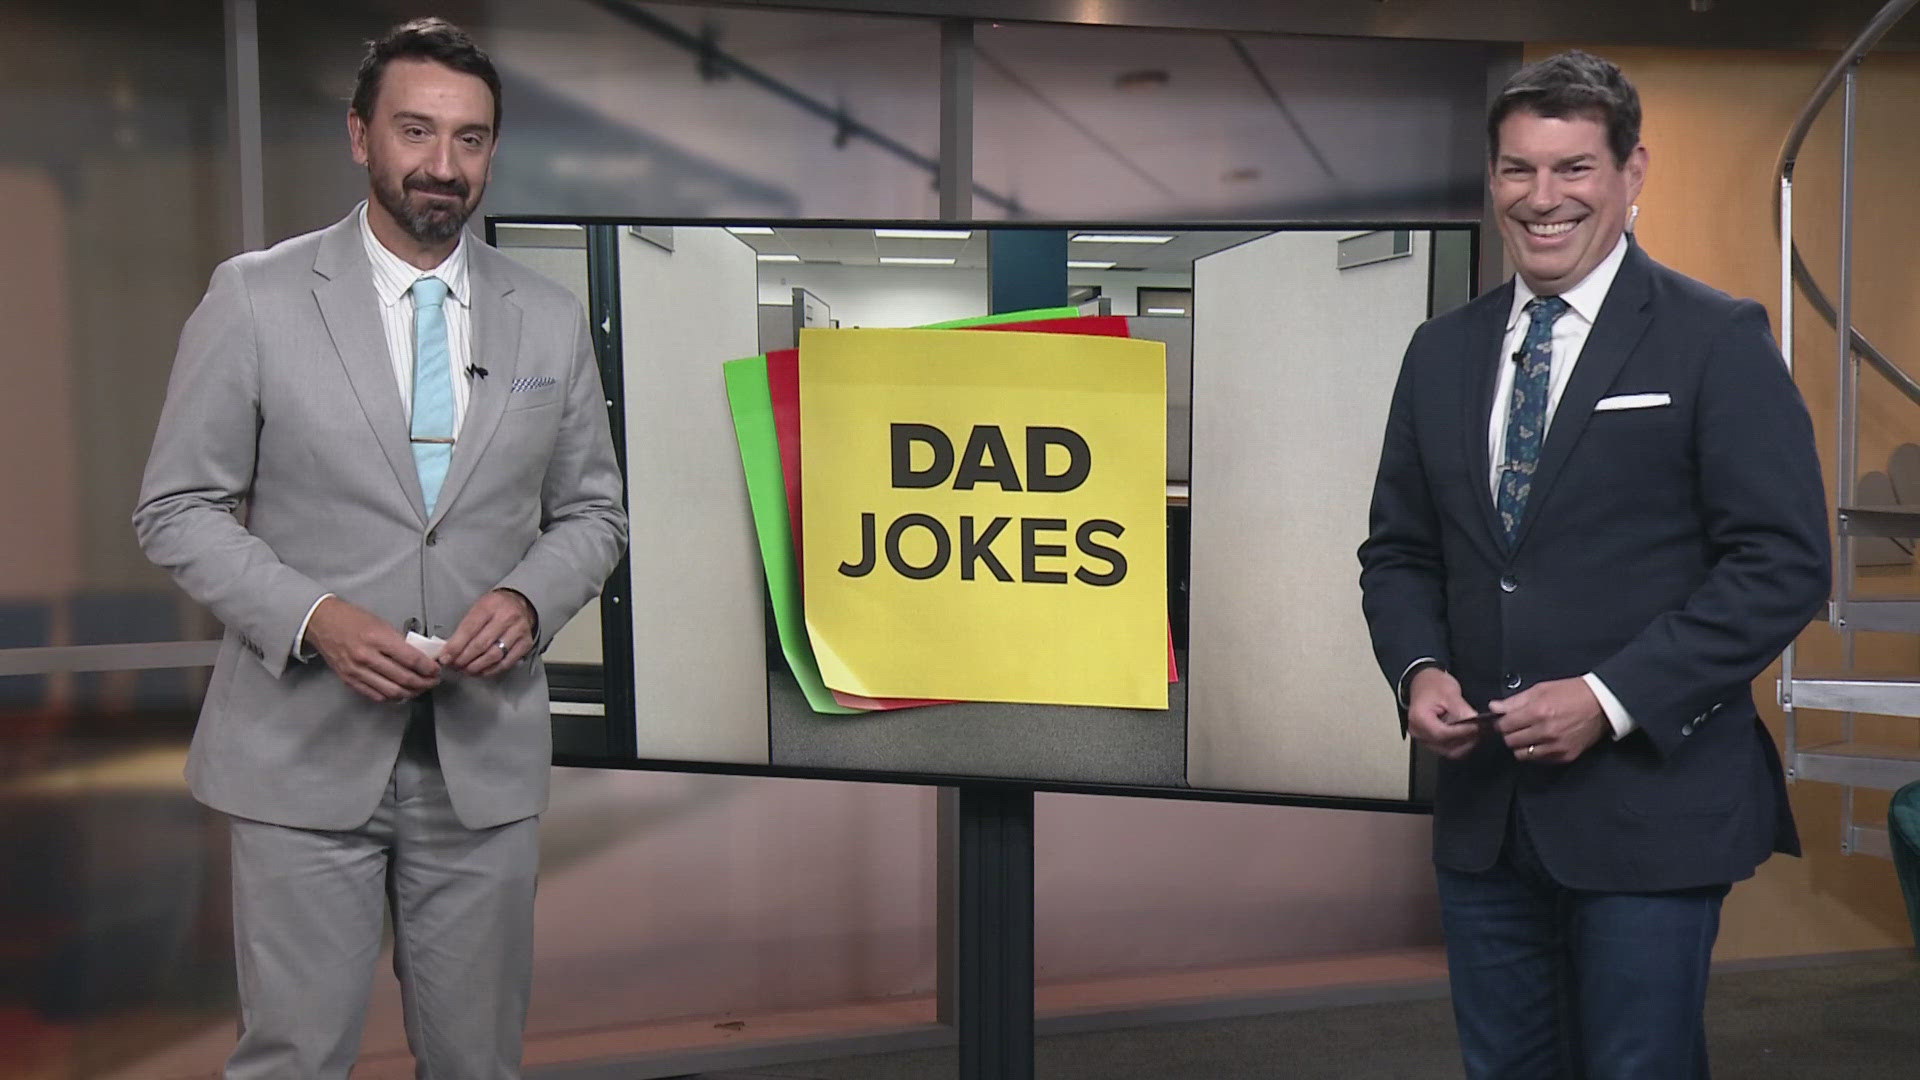 It's Friday! Enjoy these dad jokes with 3News' Matt Wintz and Dave Chudowsky. You're welcome!